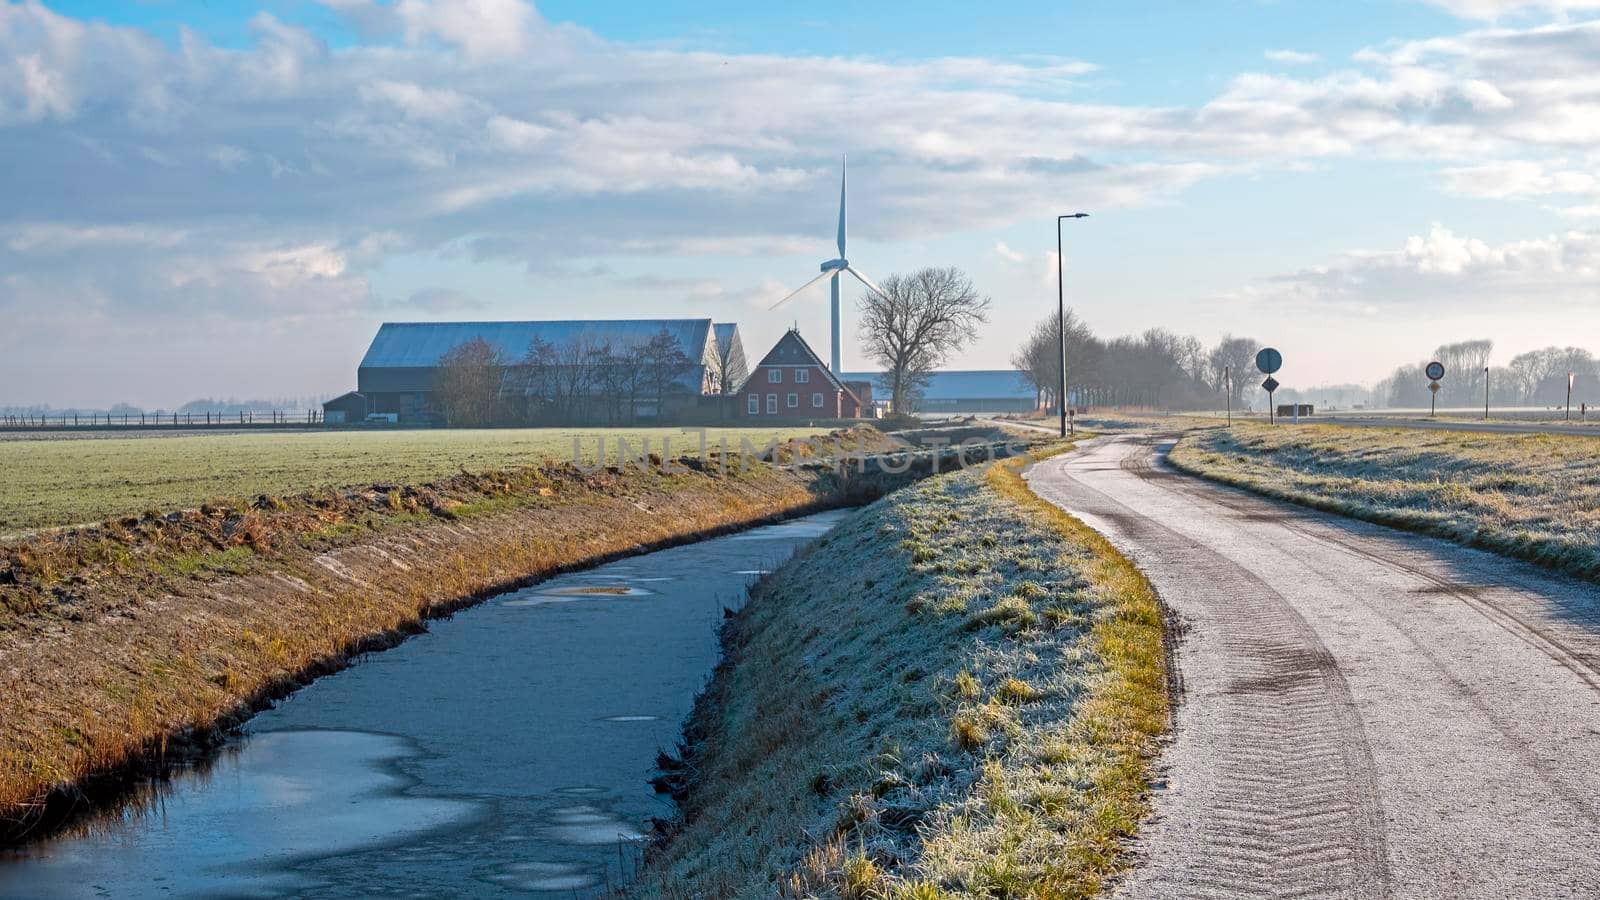 Winter landschape in the countryside from the Netherlands with windmills and farms by devy